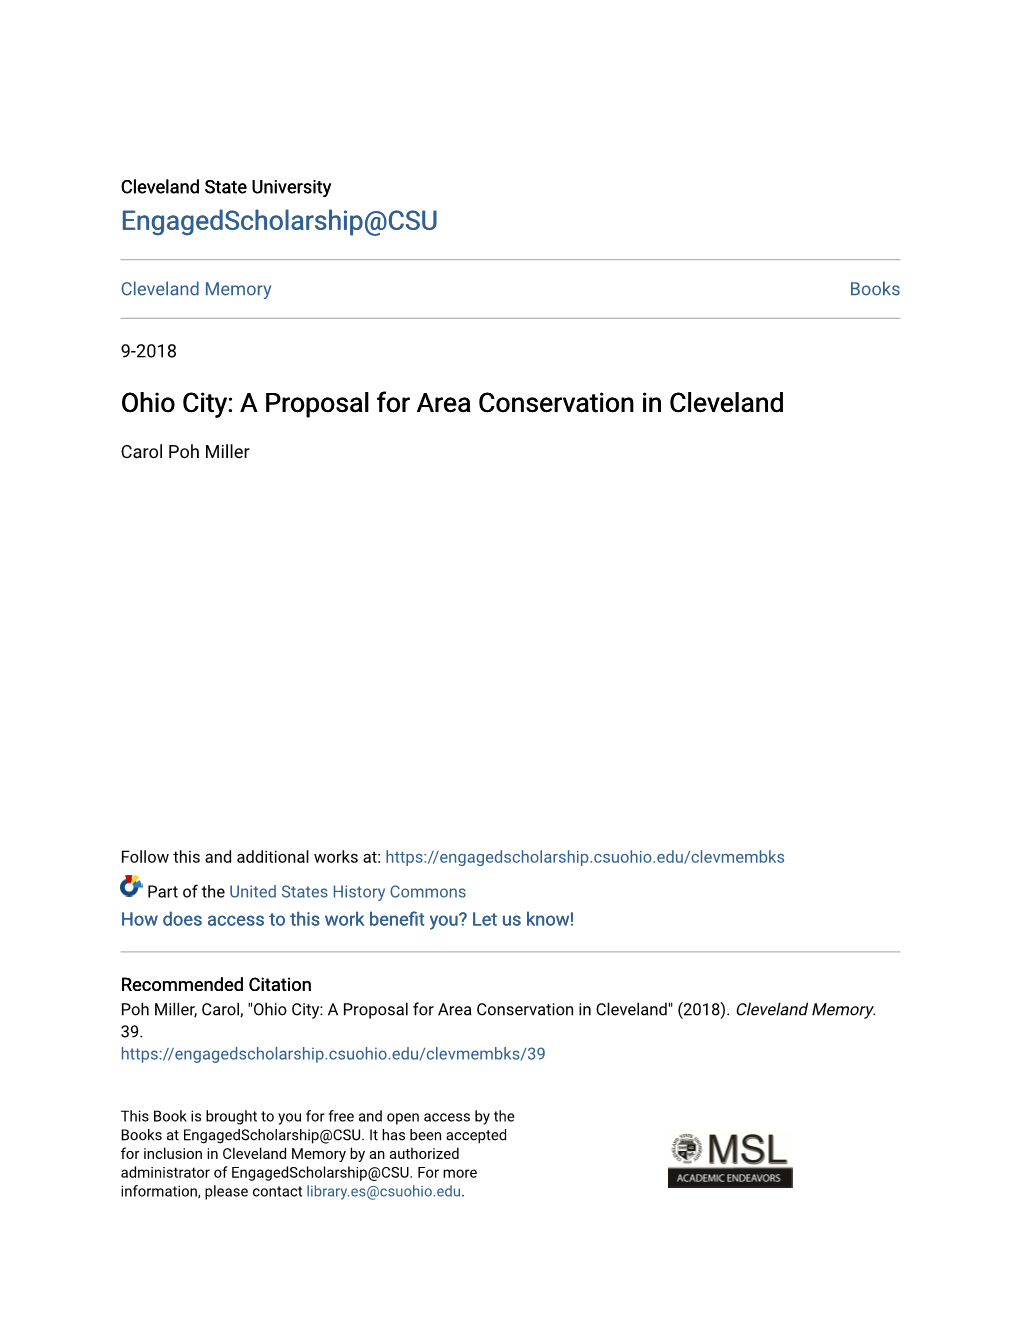 Ohio City: a Proposal for Area Conservation in Cleveland